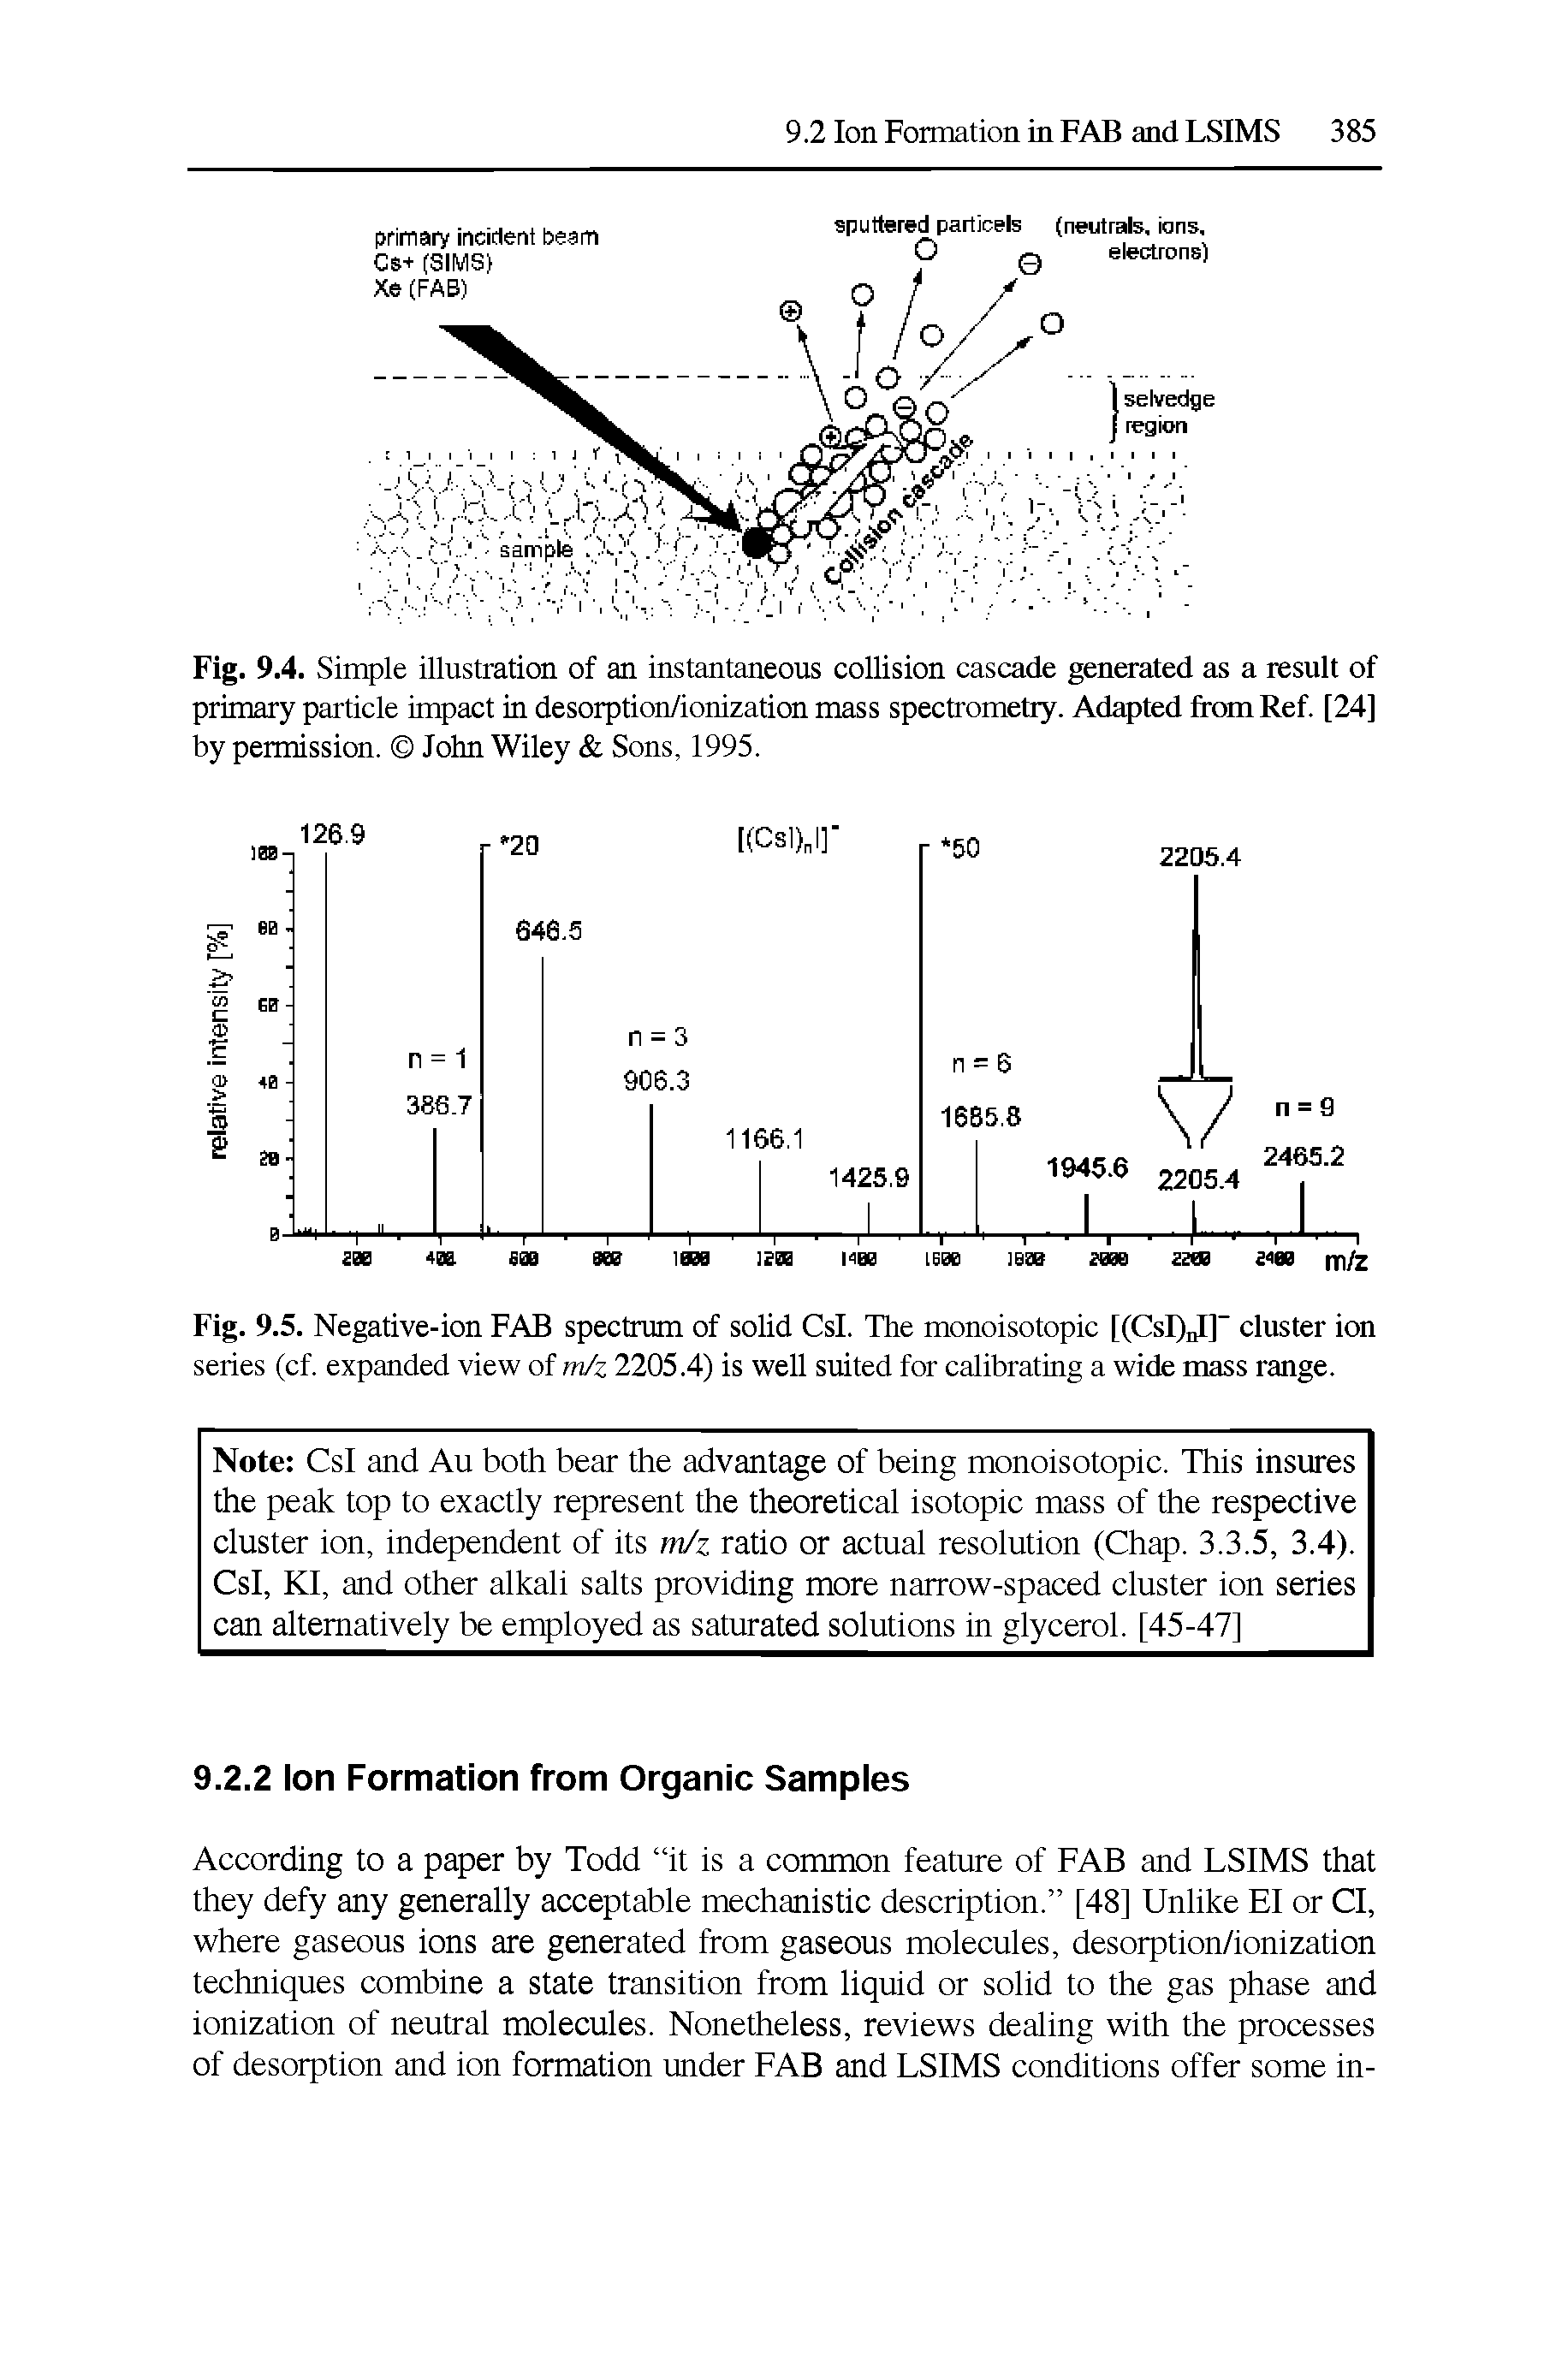 Fig. 9.4. Simple illustration of an instantaneous collision cascade generated as a result of primary particle impact in desorption/ionization mass spectrometry. Adapted from Ref. [24] by permission. John Wiley Sons, 1995.